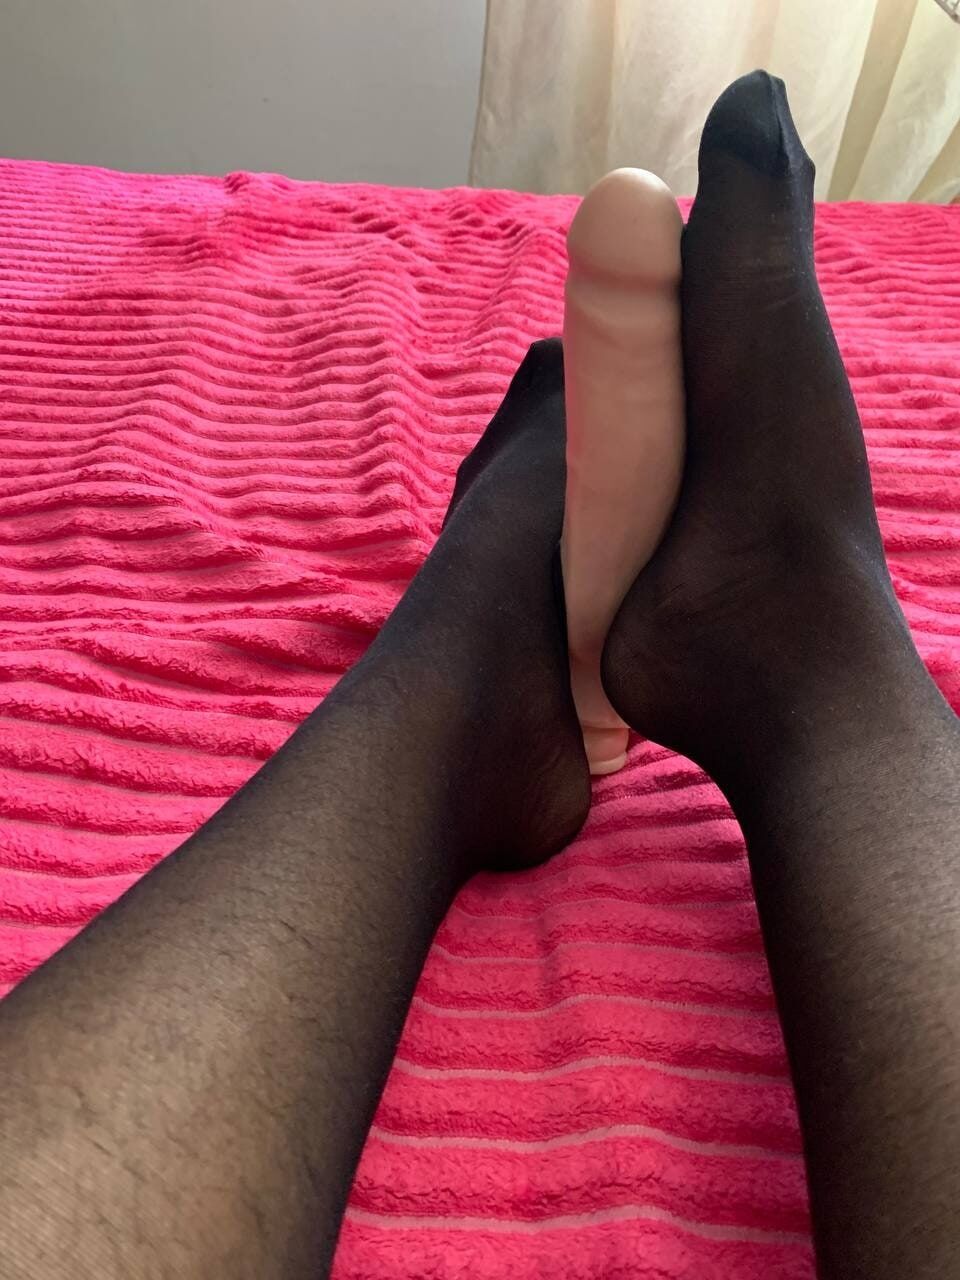 I want you to eat my beautiful feet  #9